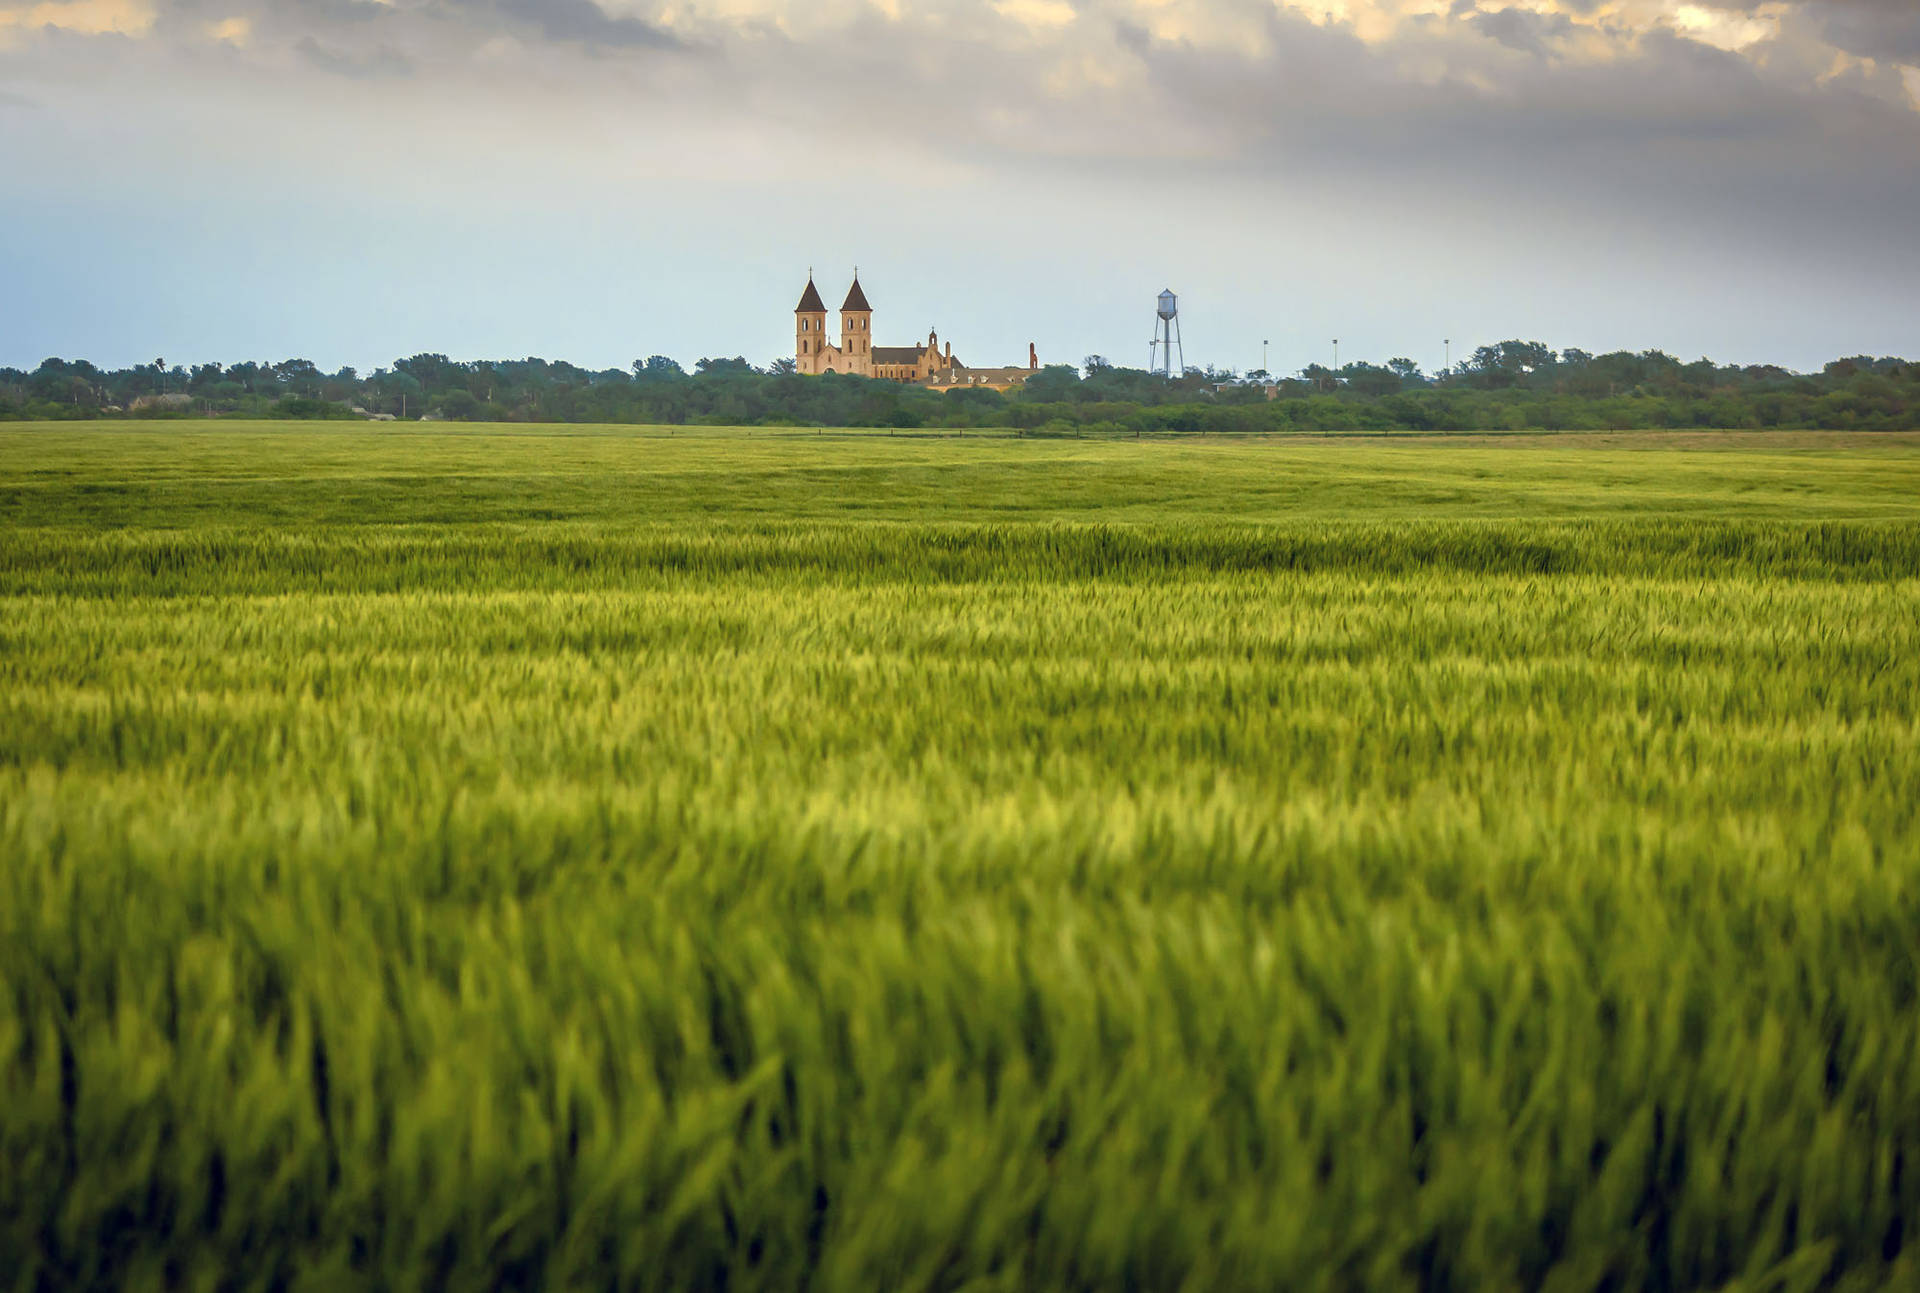 The scenic beauty of St. Fidelis Basilica surrounded by golden fields in Kansas Wallpaper